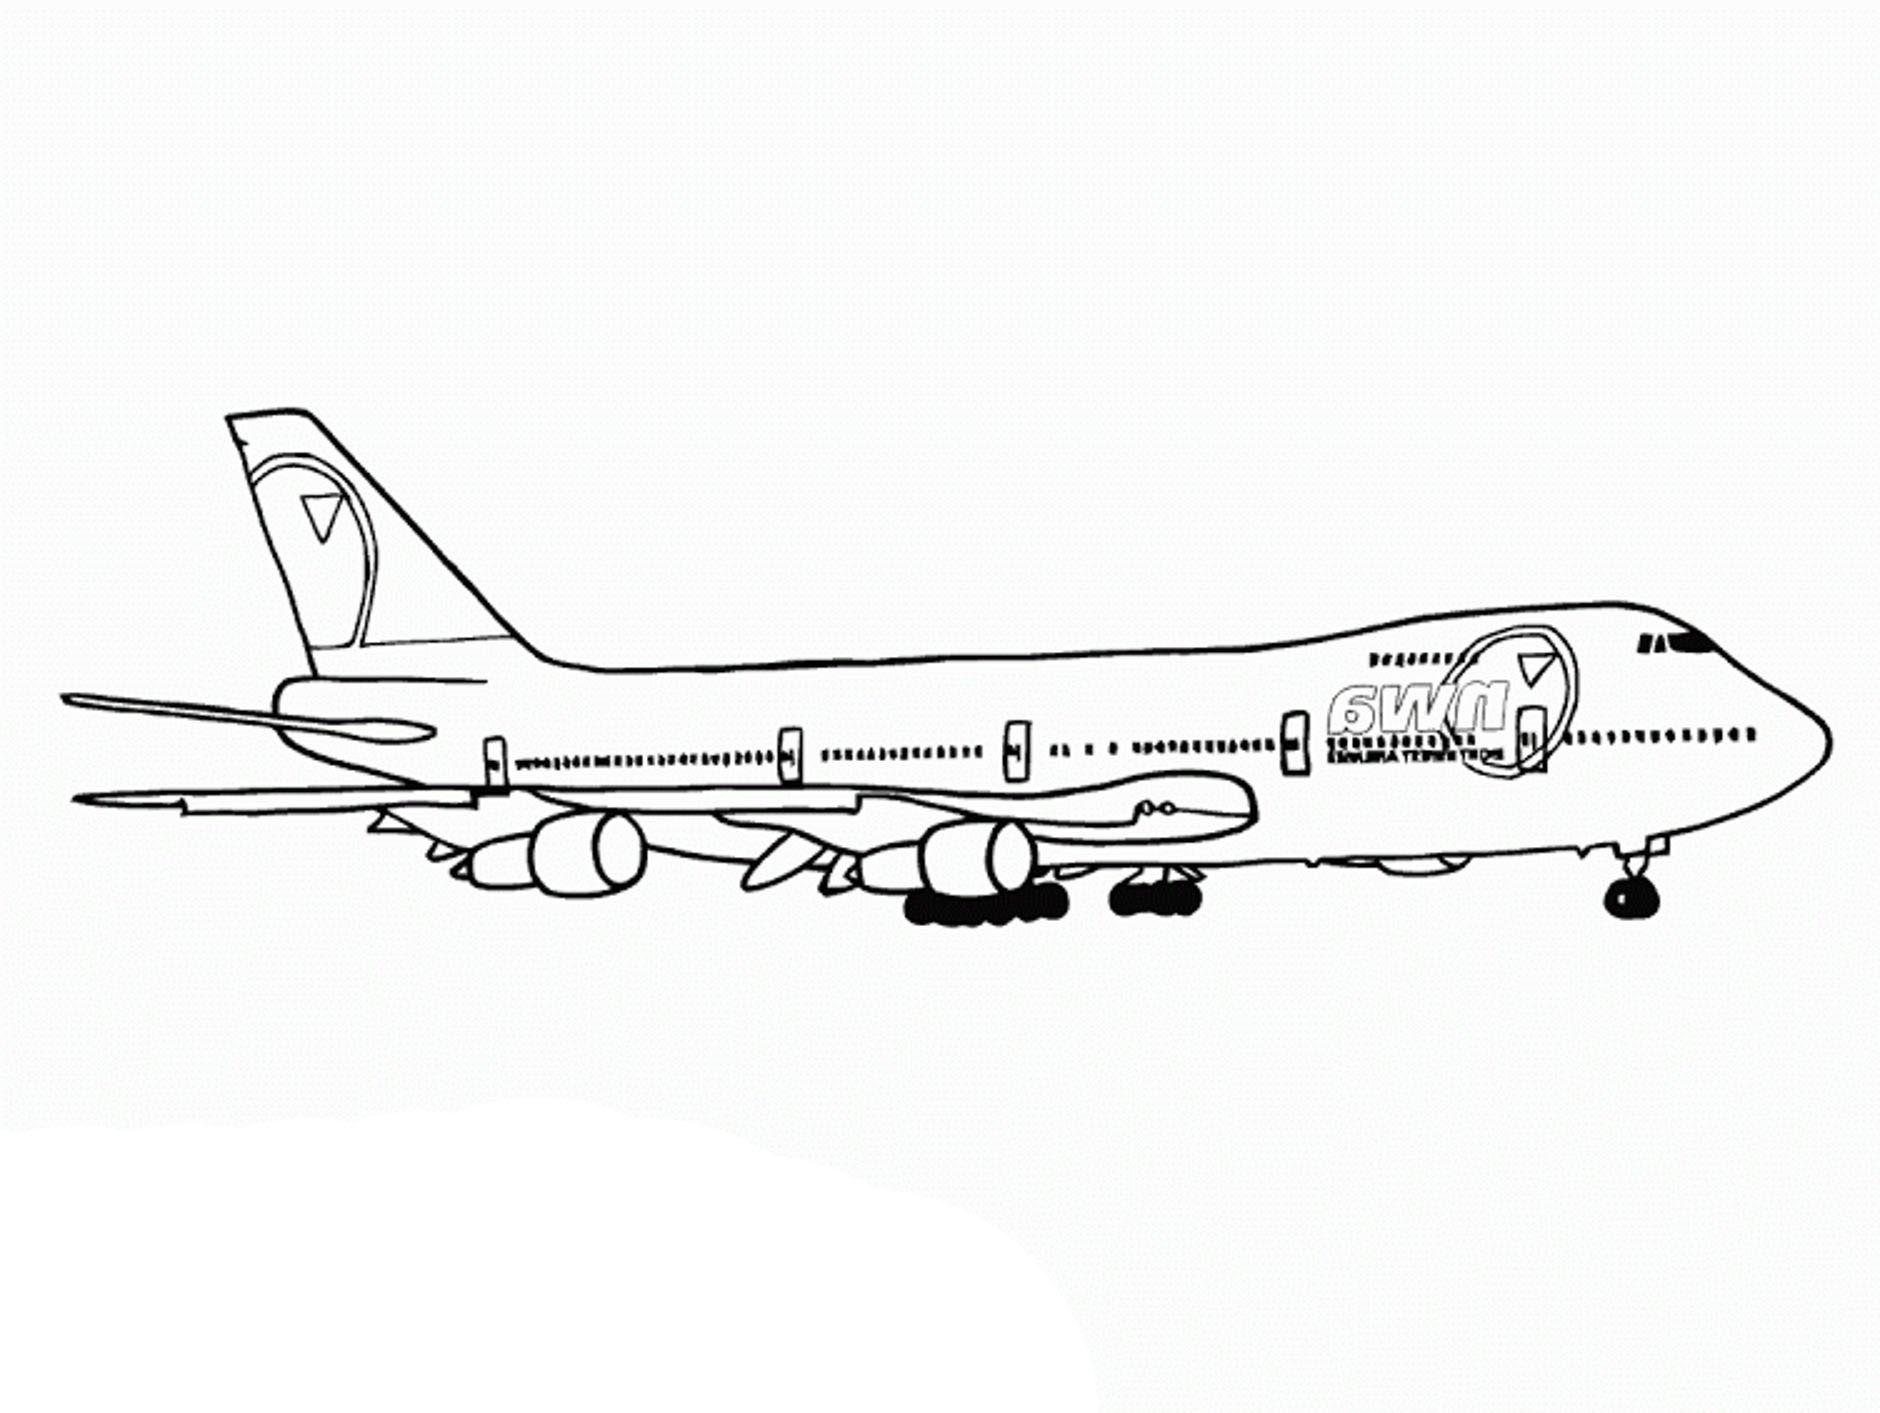 Print & Download   The Sophisticated Transportation of Airplane ...